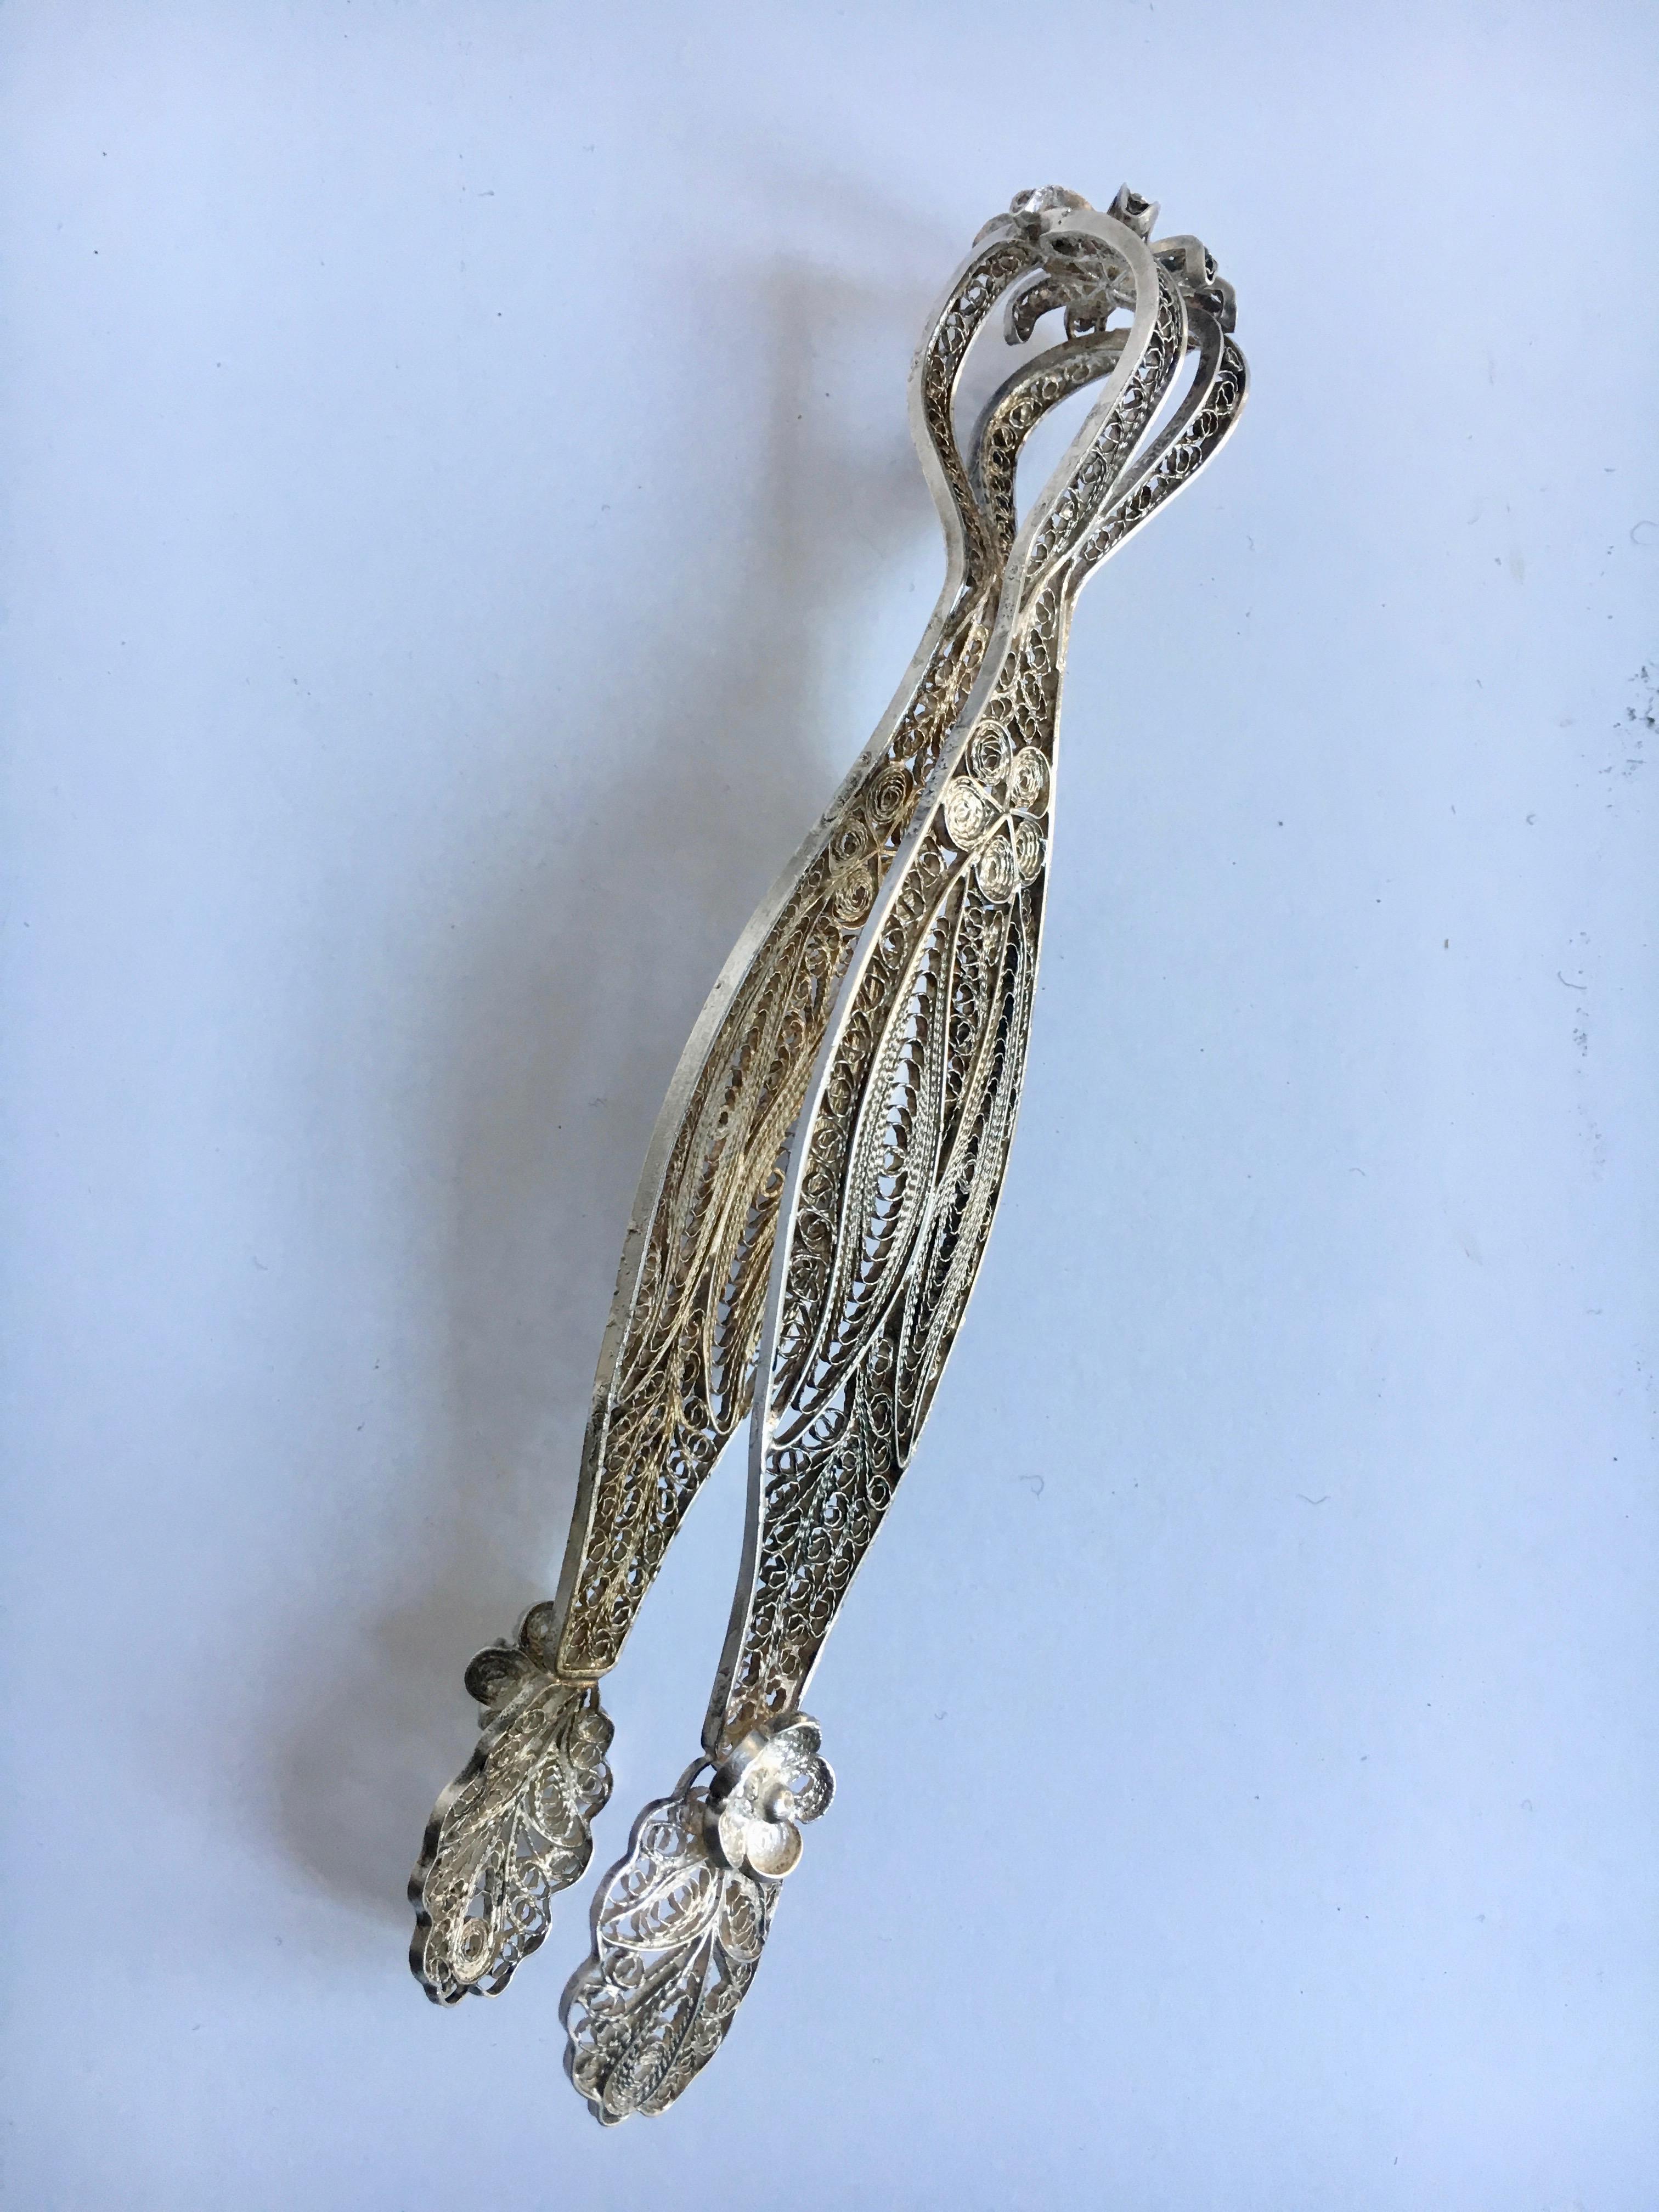 .800 silver filigree sugar cube tongs - delicate and special. Tea time will be special at your table!
1.35 Ounce.